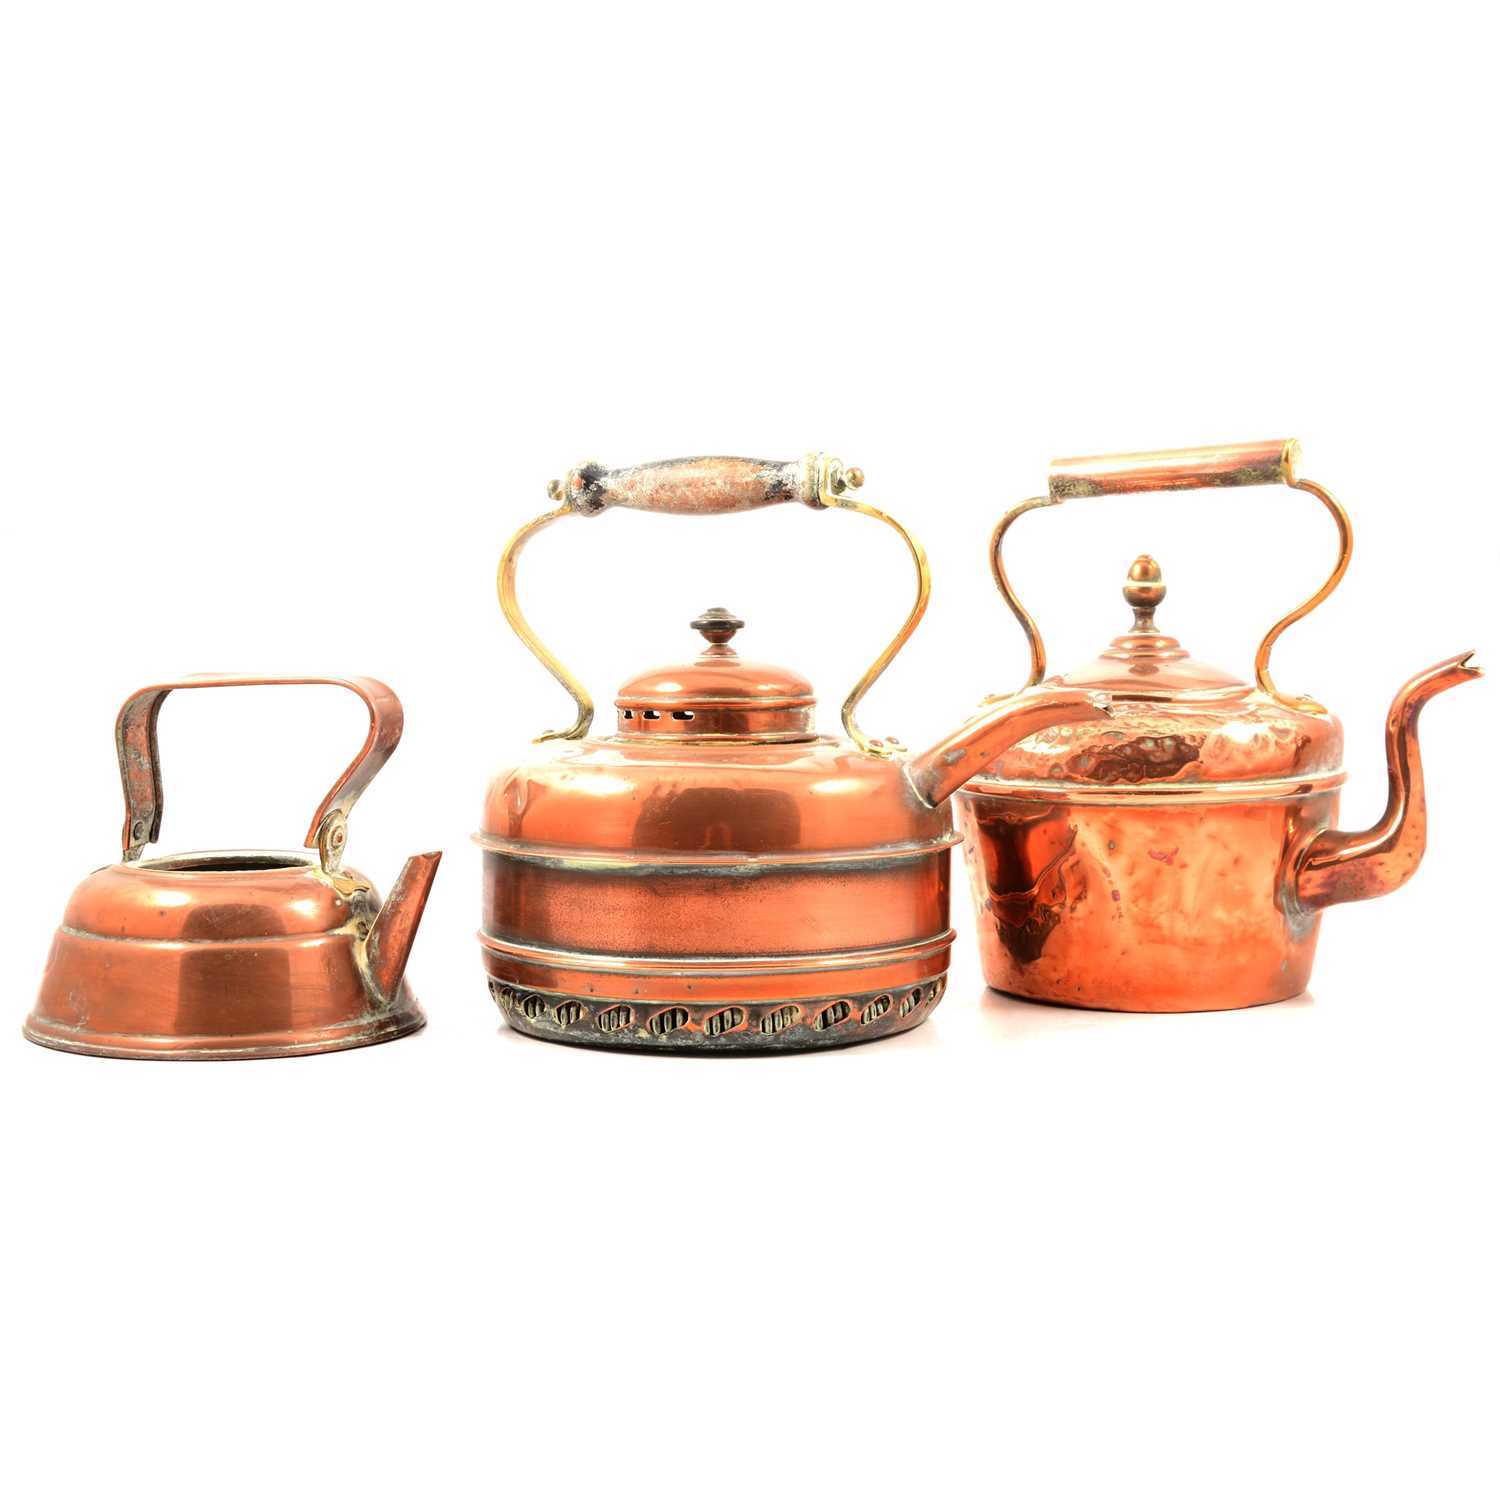 Lot 115 - Two Victorian copper tea urns; and a collection of antique metalware